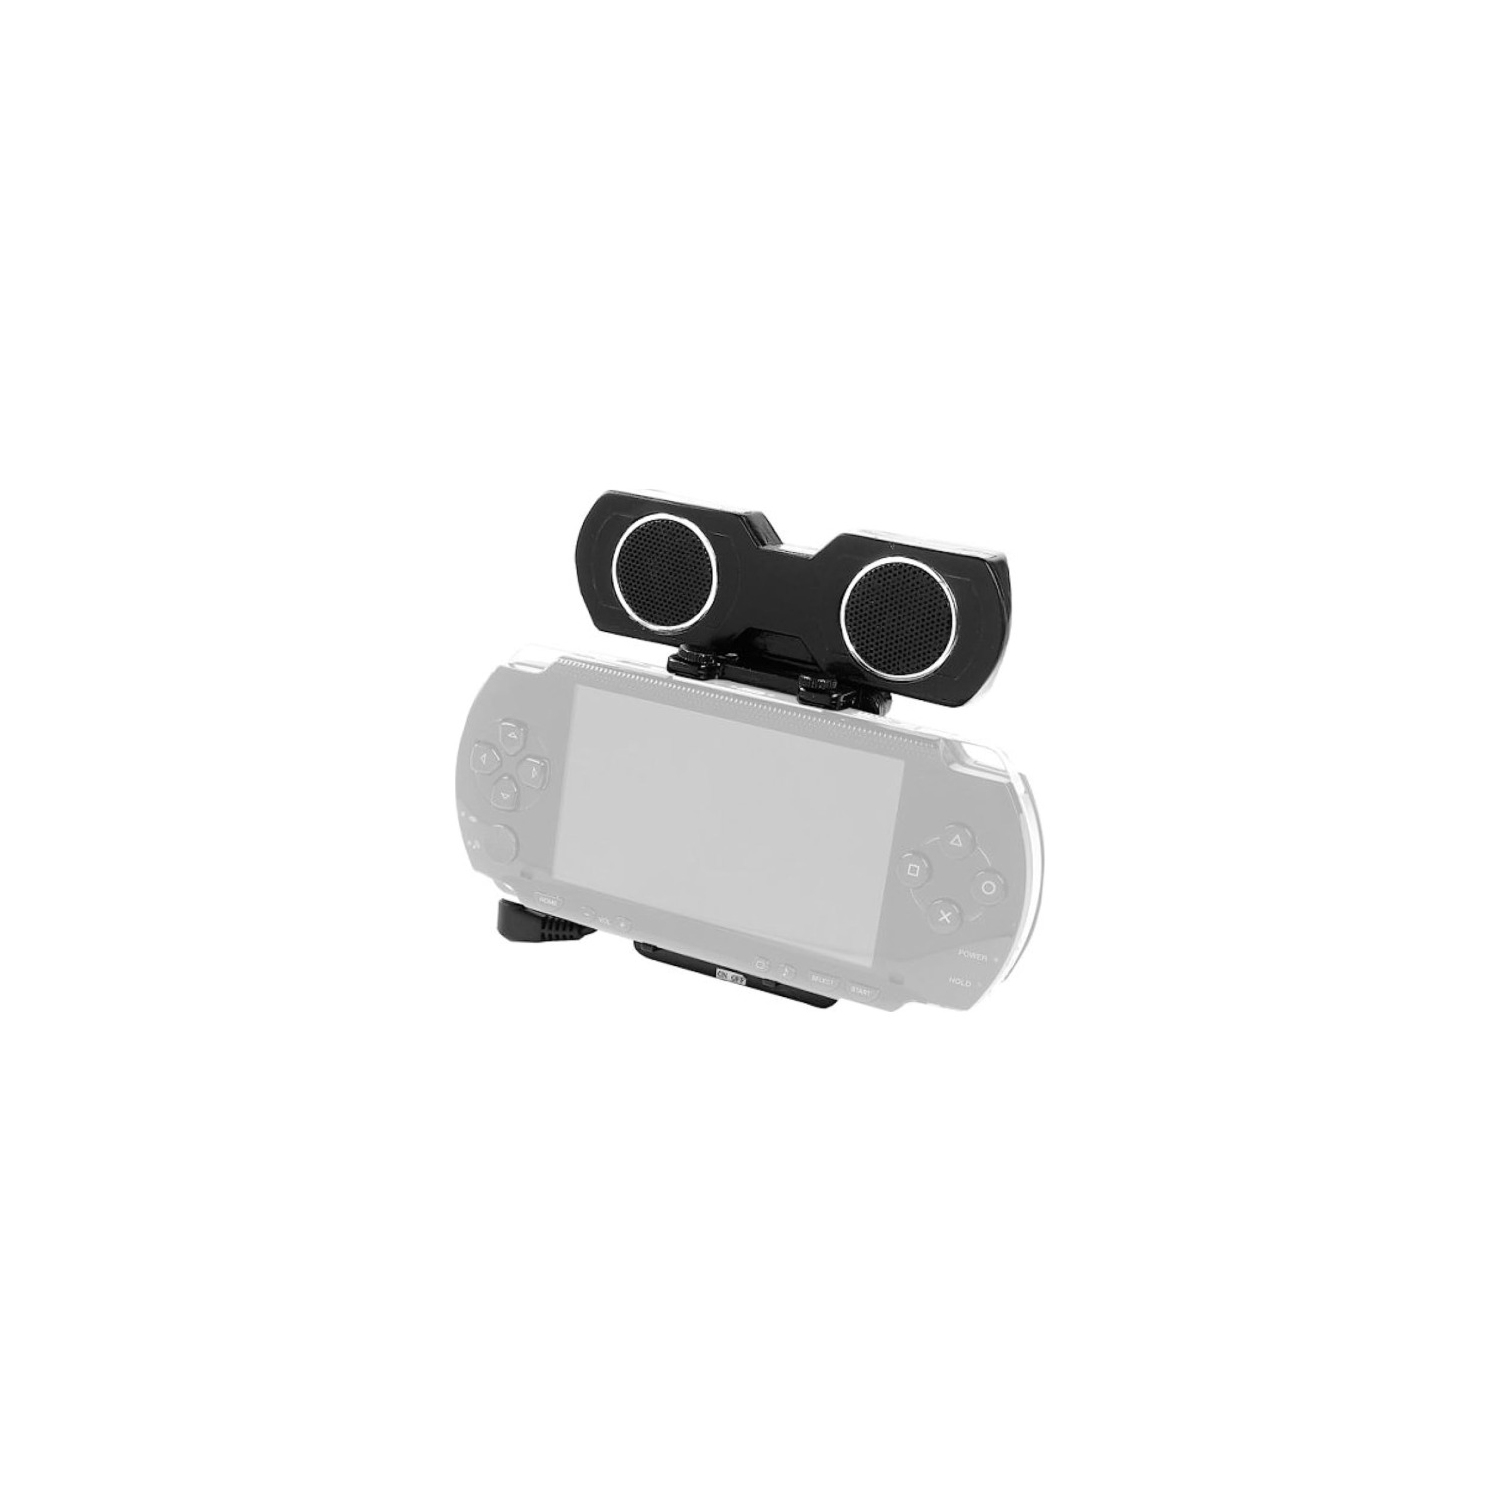 Stereo Speakers Attachment For PSP System